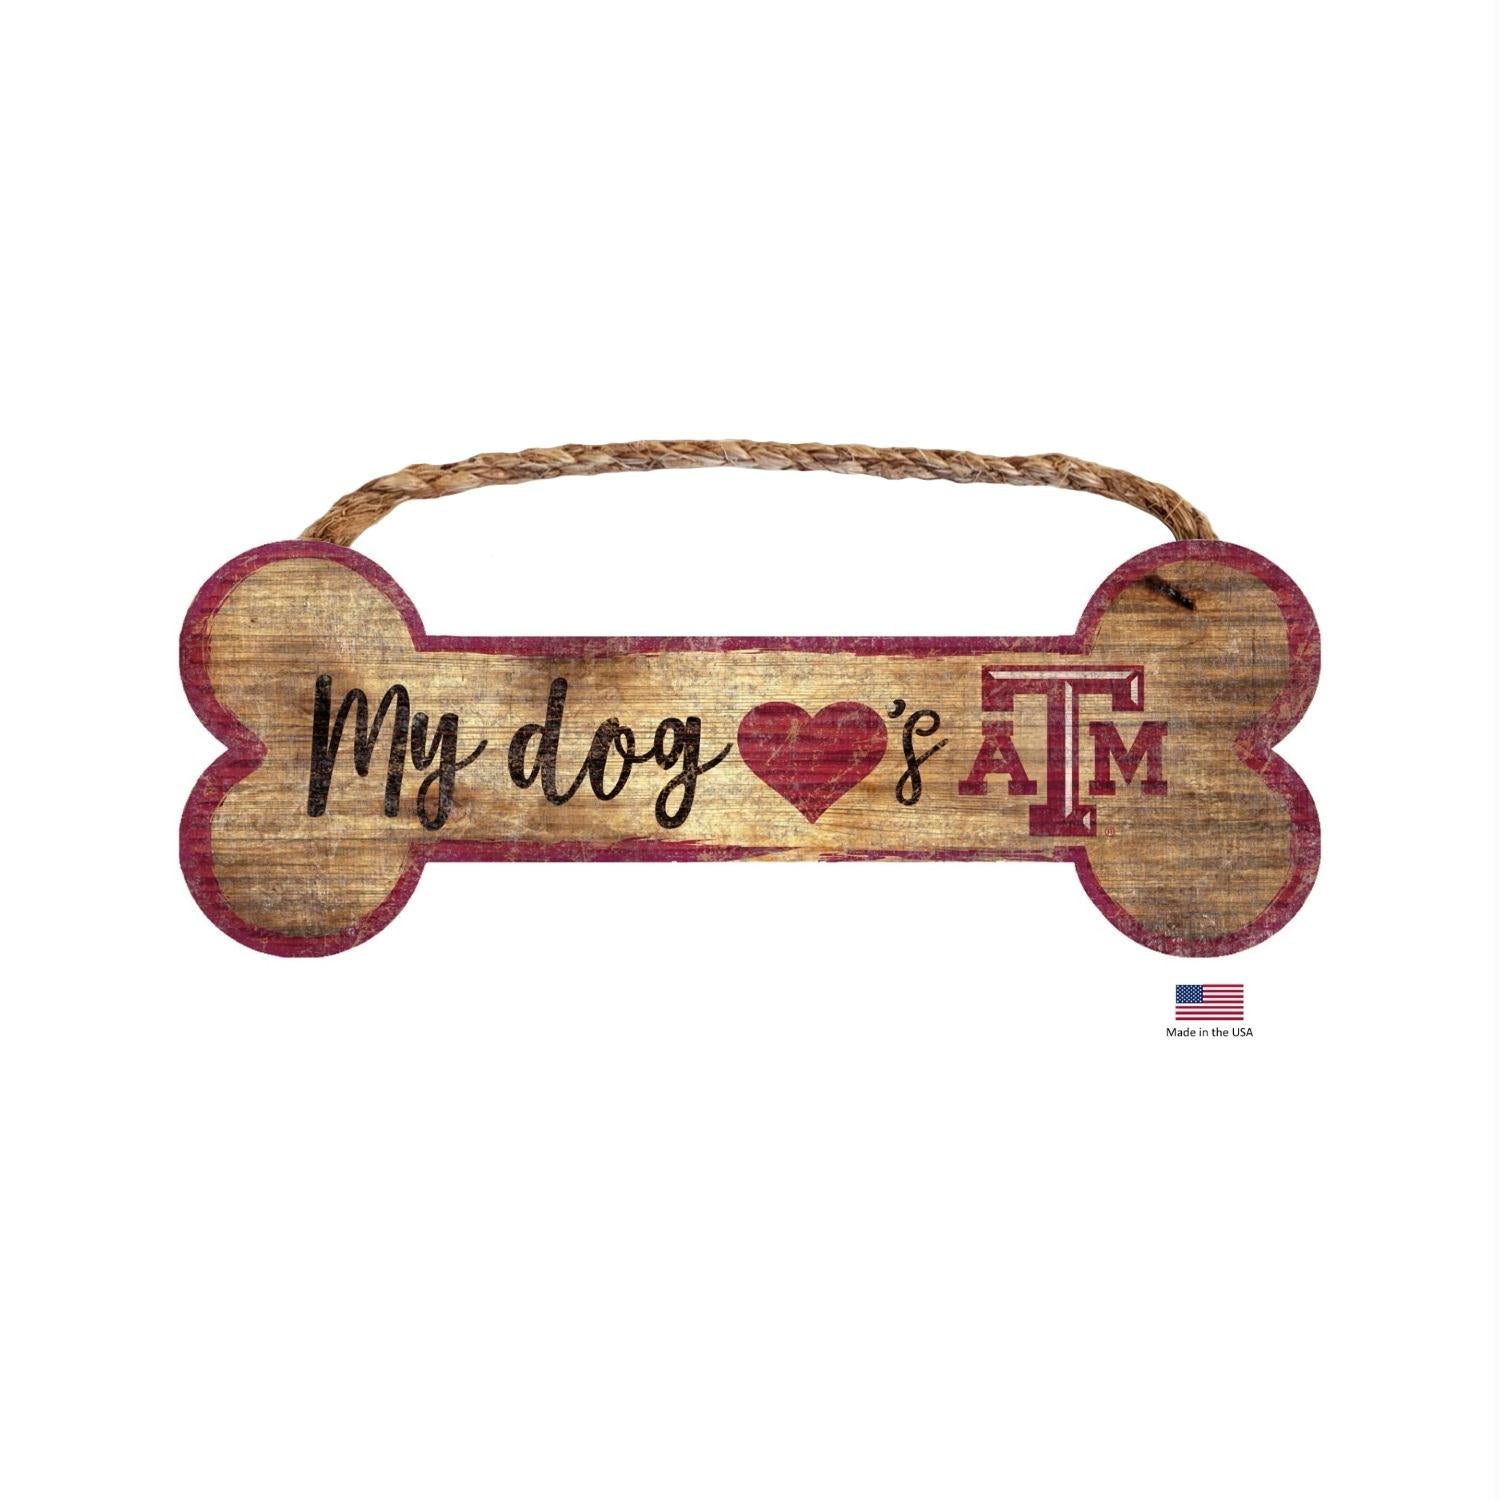 Texas A&M Aggies Distressed Dog Bone Wooden Sign - Stay Golden Doodle